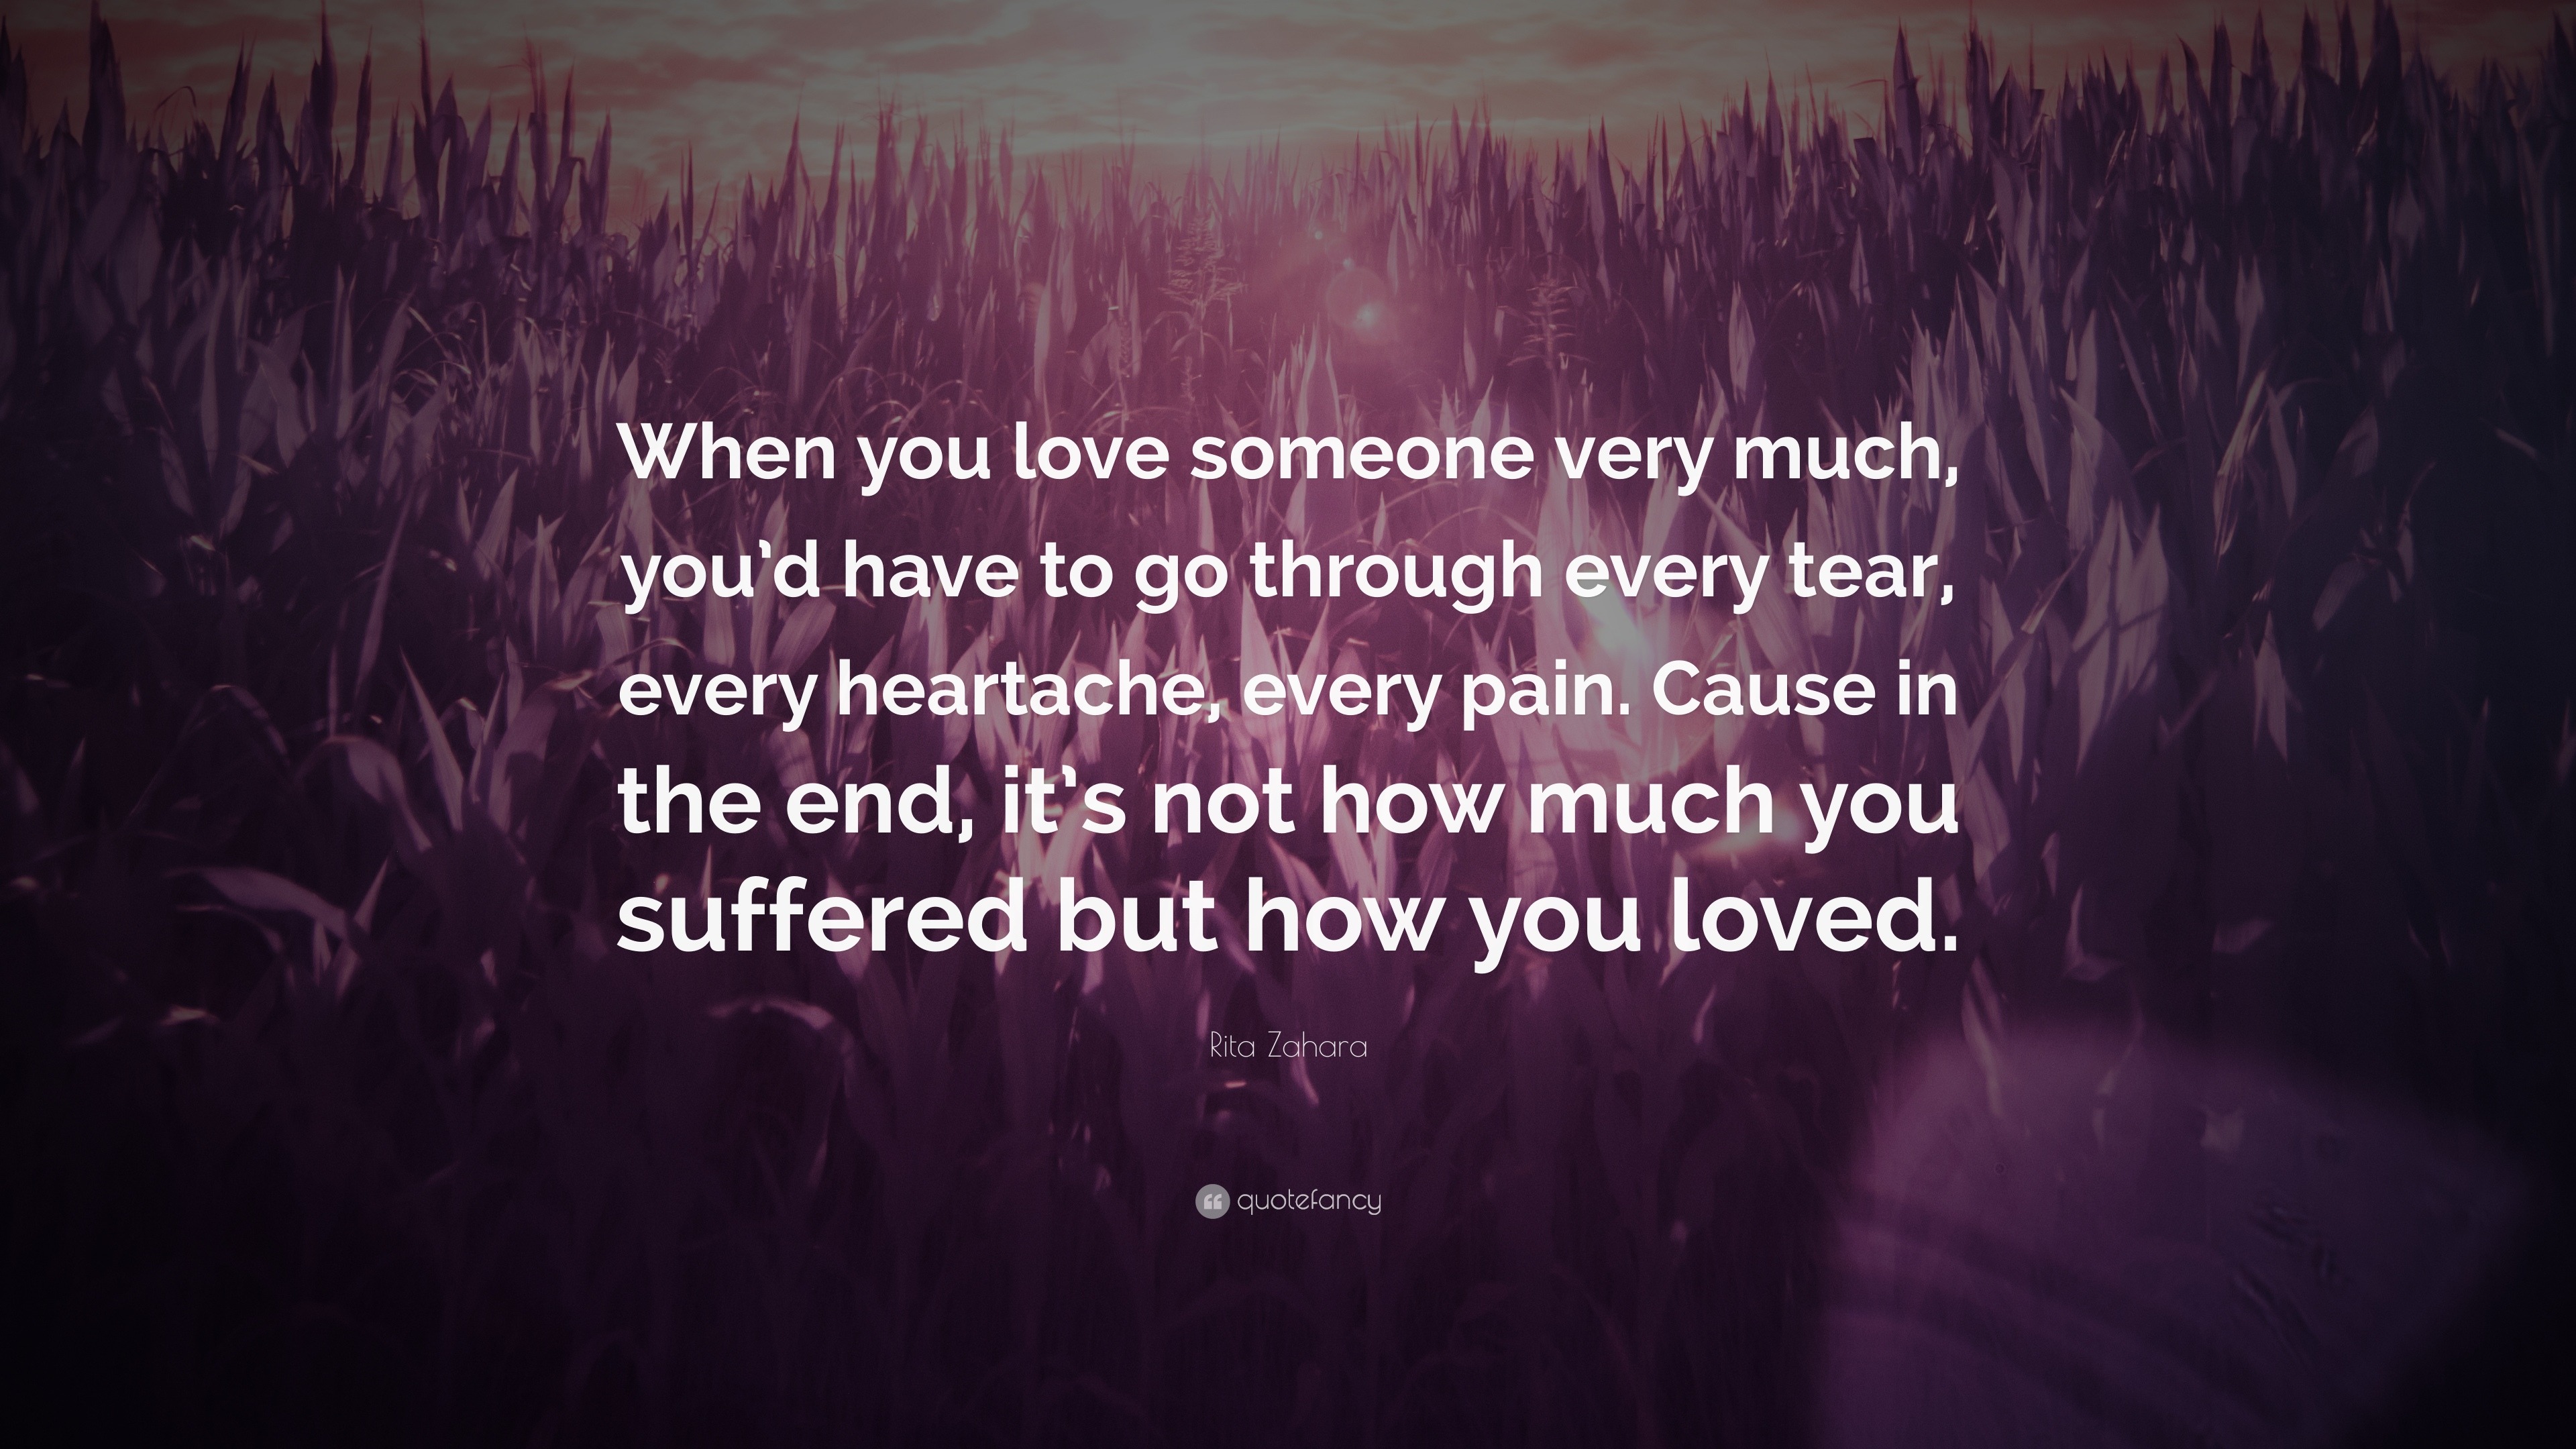 Rita Zahara Quote: “When you love someone very much, you’d have to go ...